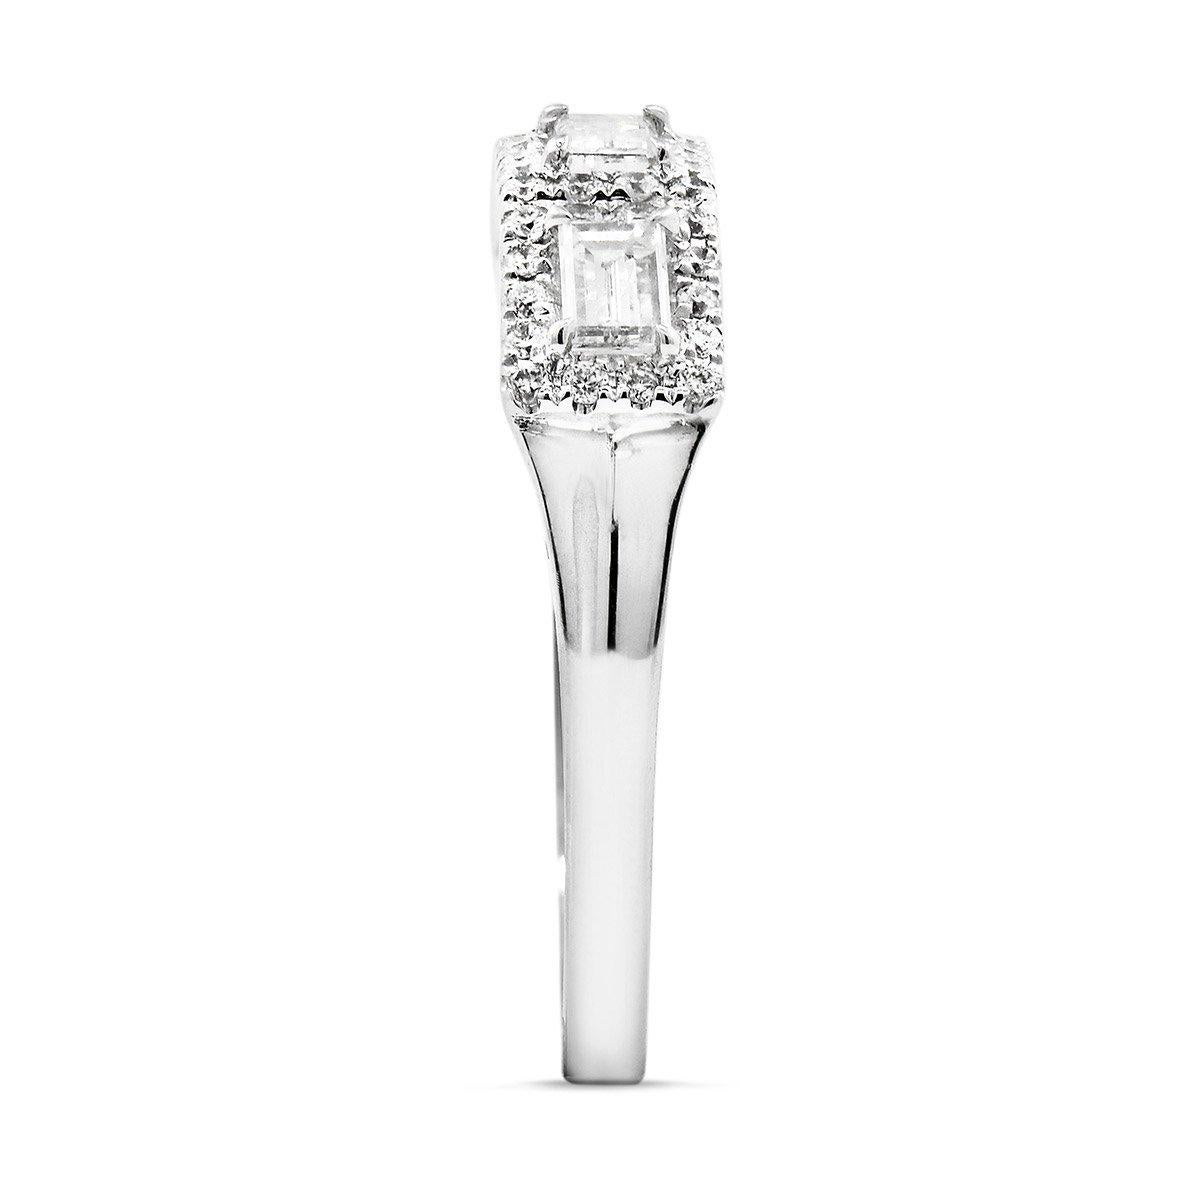 This elegant piece consists of baguette shaped natural untreated white diamonds surrounded by smaller white diamonds making up a total carat weight of 0.56. This piece has been expertly crafted using 18 karat white gold and is EG Lab certified.